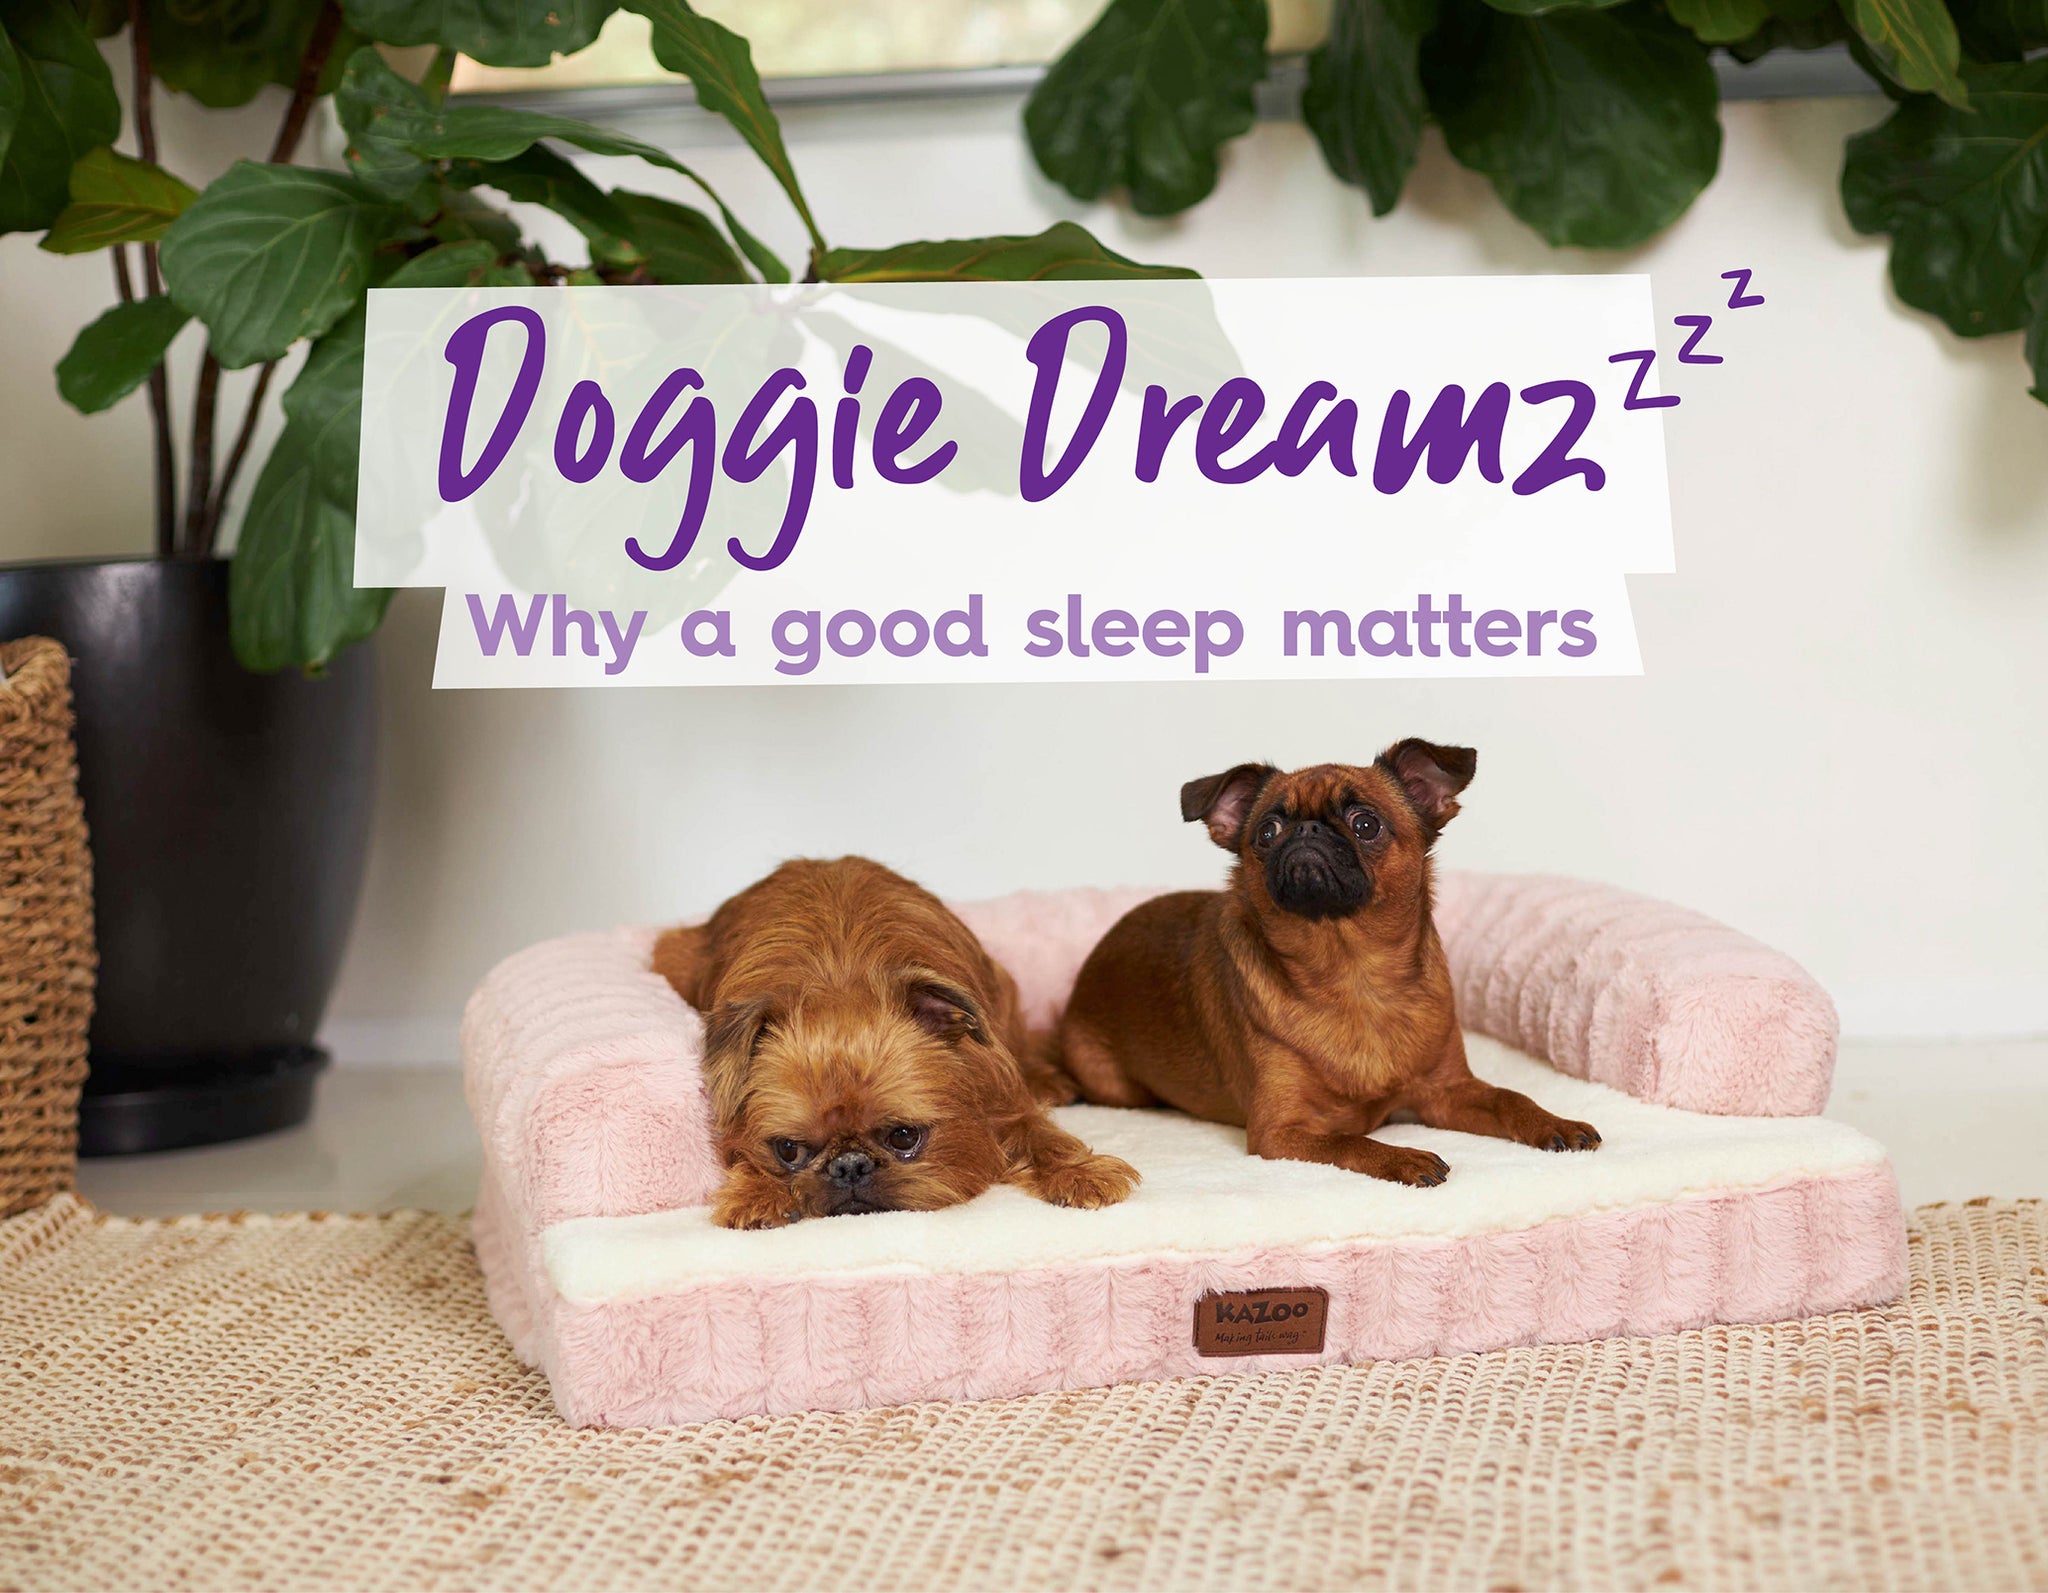 Doggie Dreams: why a good sleep matters. Two little dog sleeping on pink fluffy dog bed